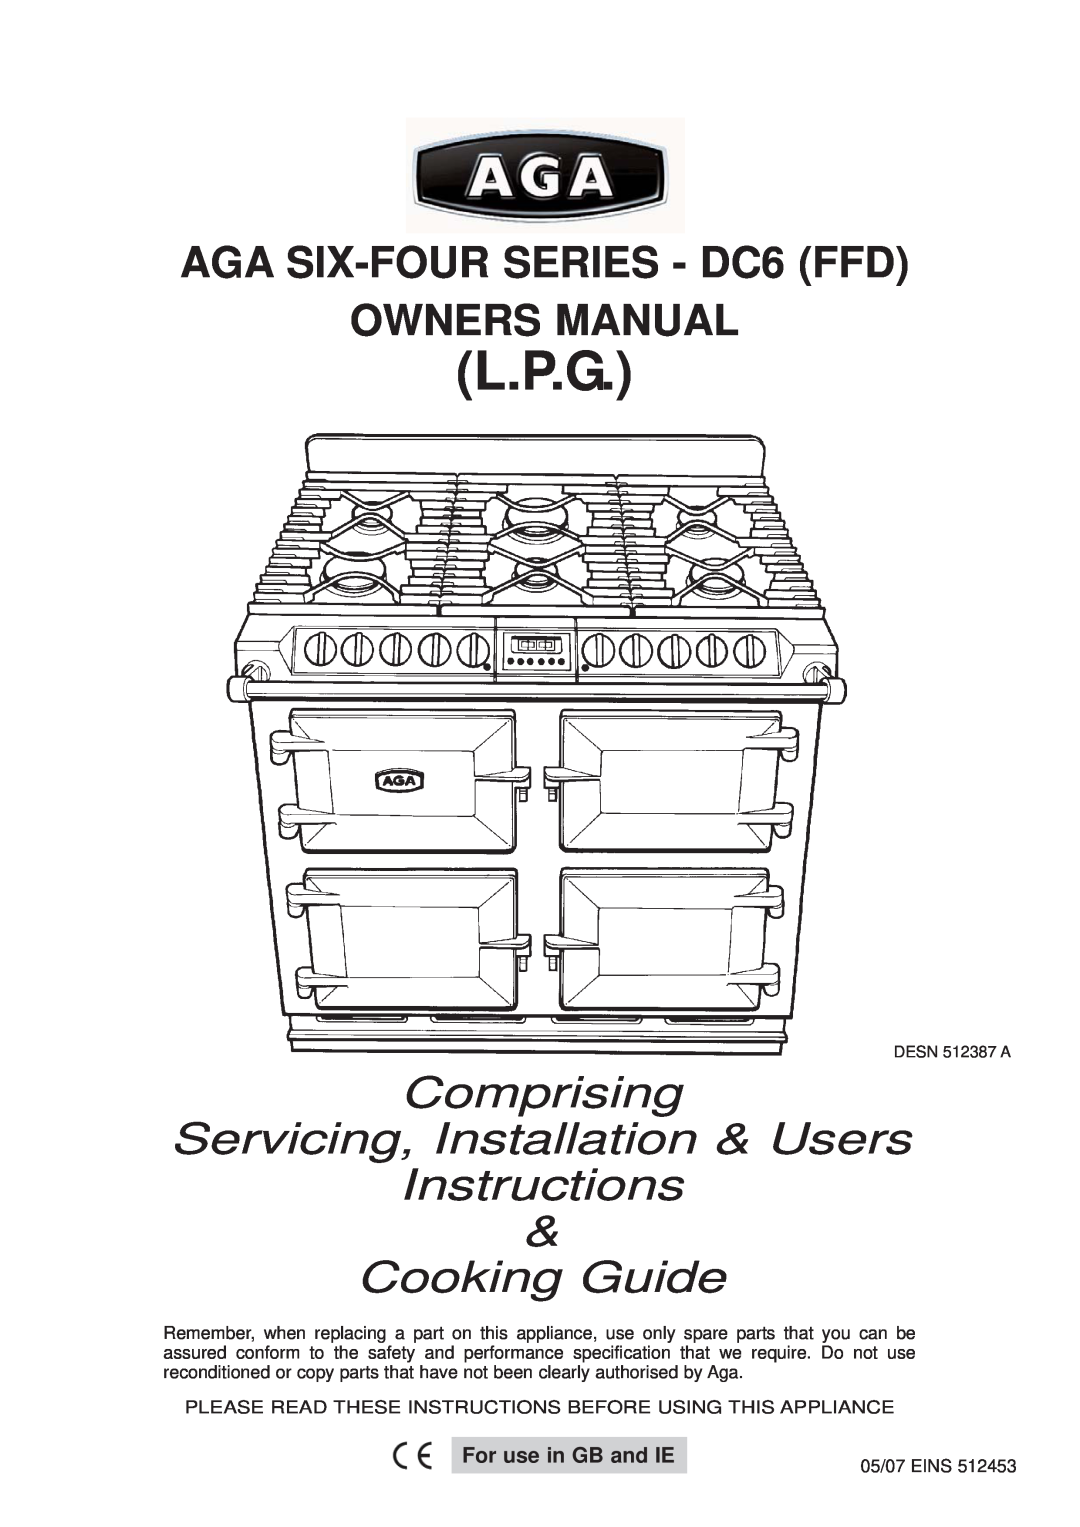 Aga Ranges DESN 512387 A owner manual L.P.G, Comprising Servicing, Installation & Users Instructions, Cooking Guide 